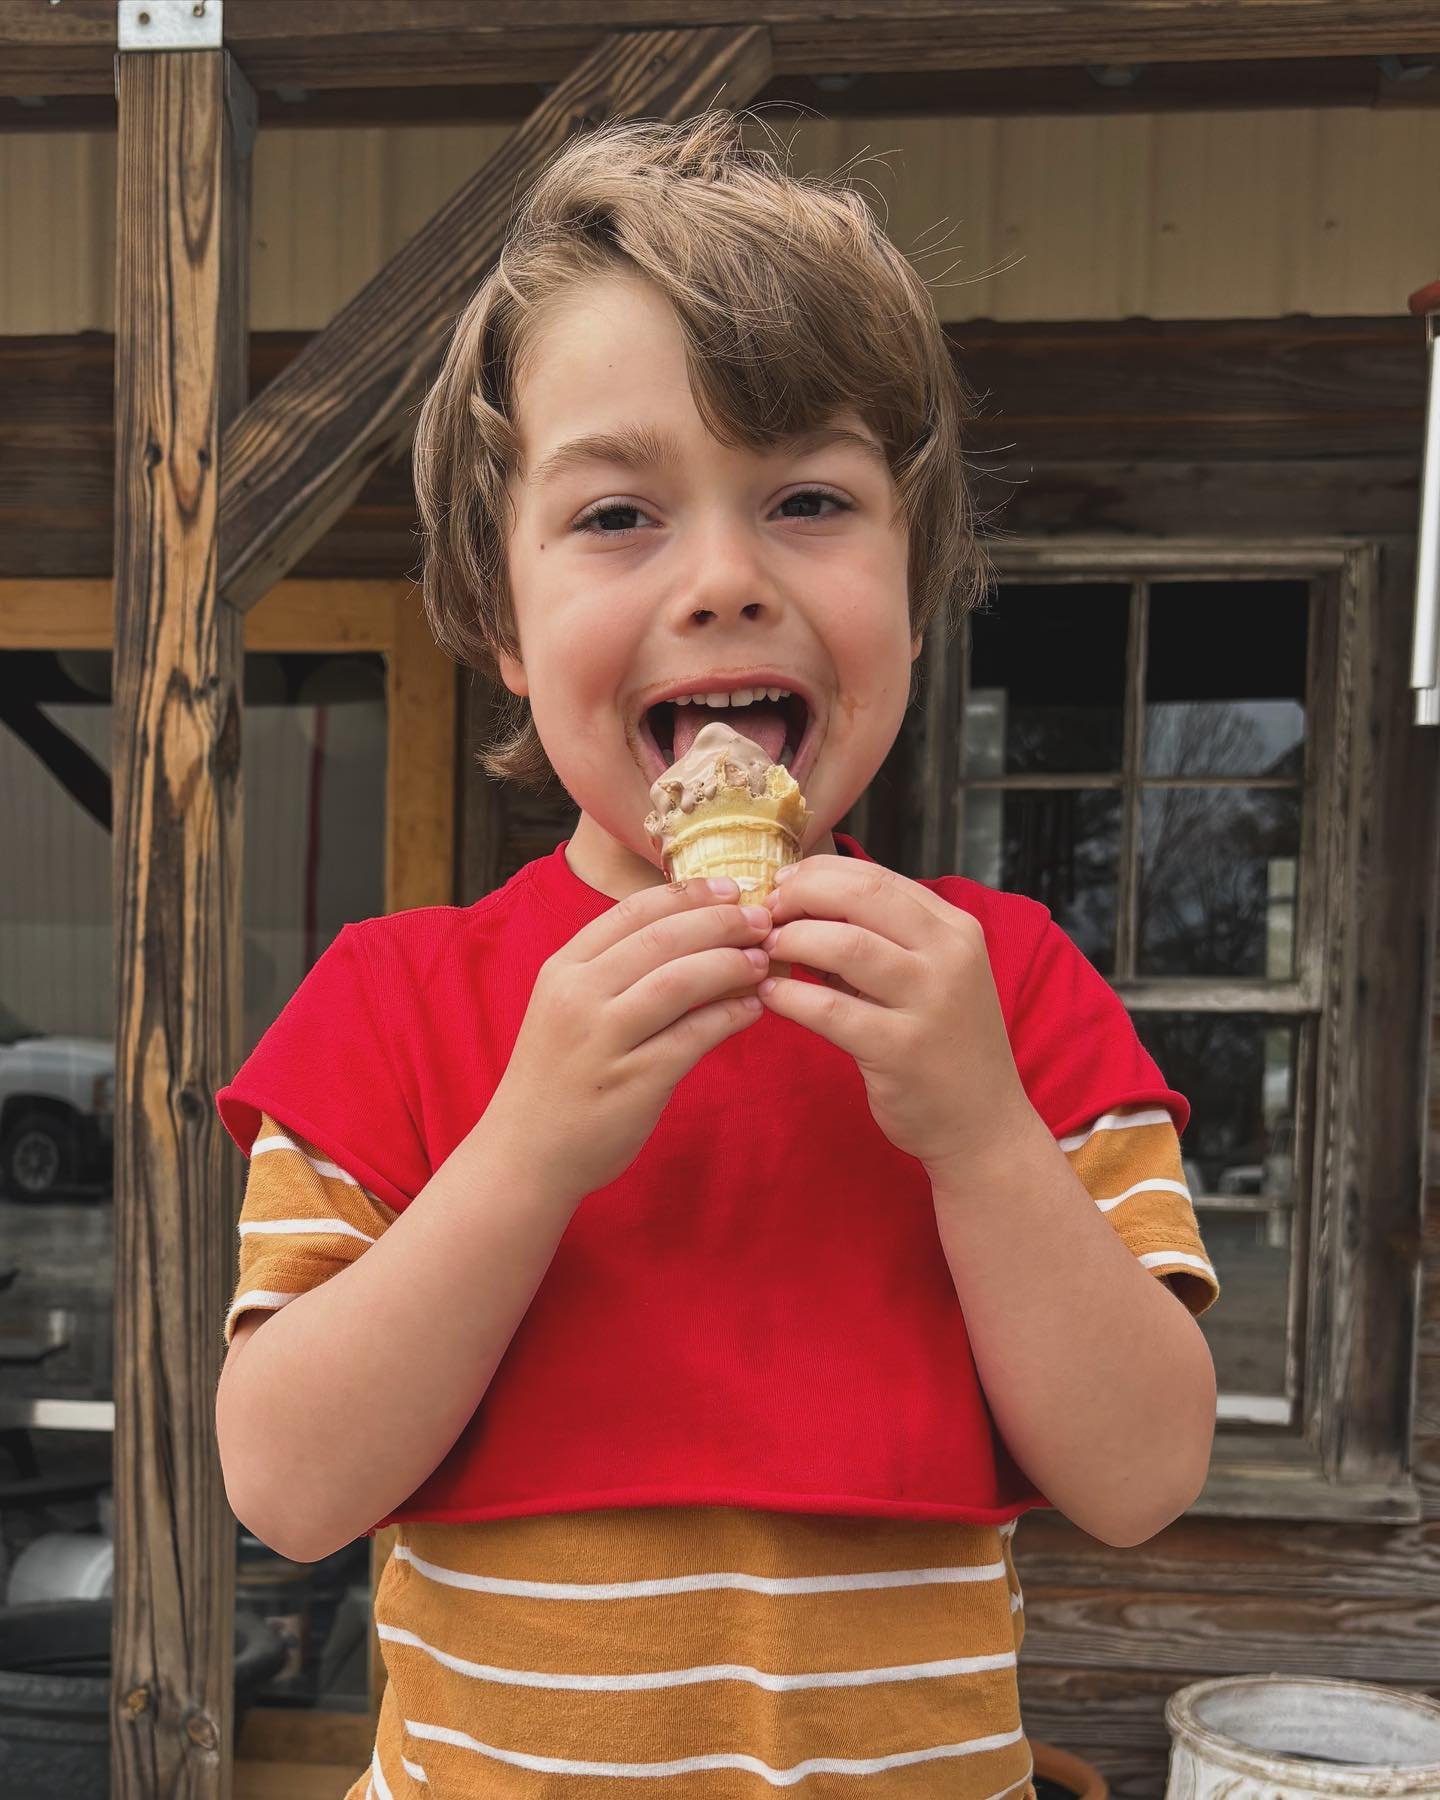 In addition to chocolate, vanilla and our home made strawberry ice cream - what flavor would you like to see at Smith&rsquo;s Farm Market next week?